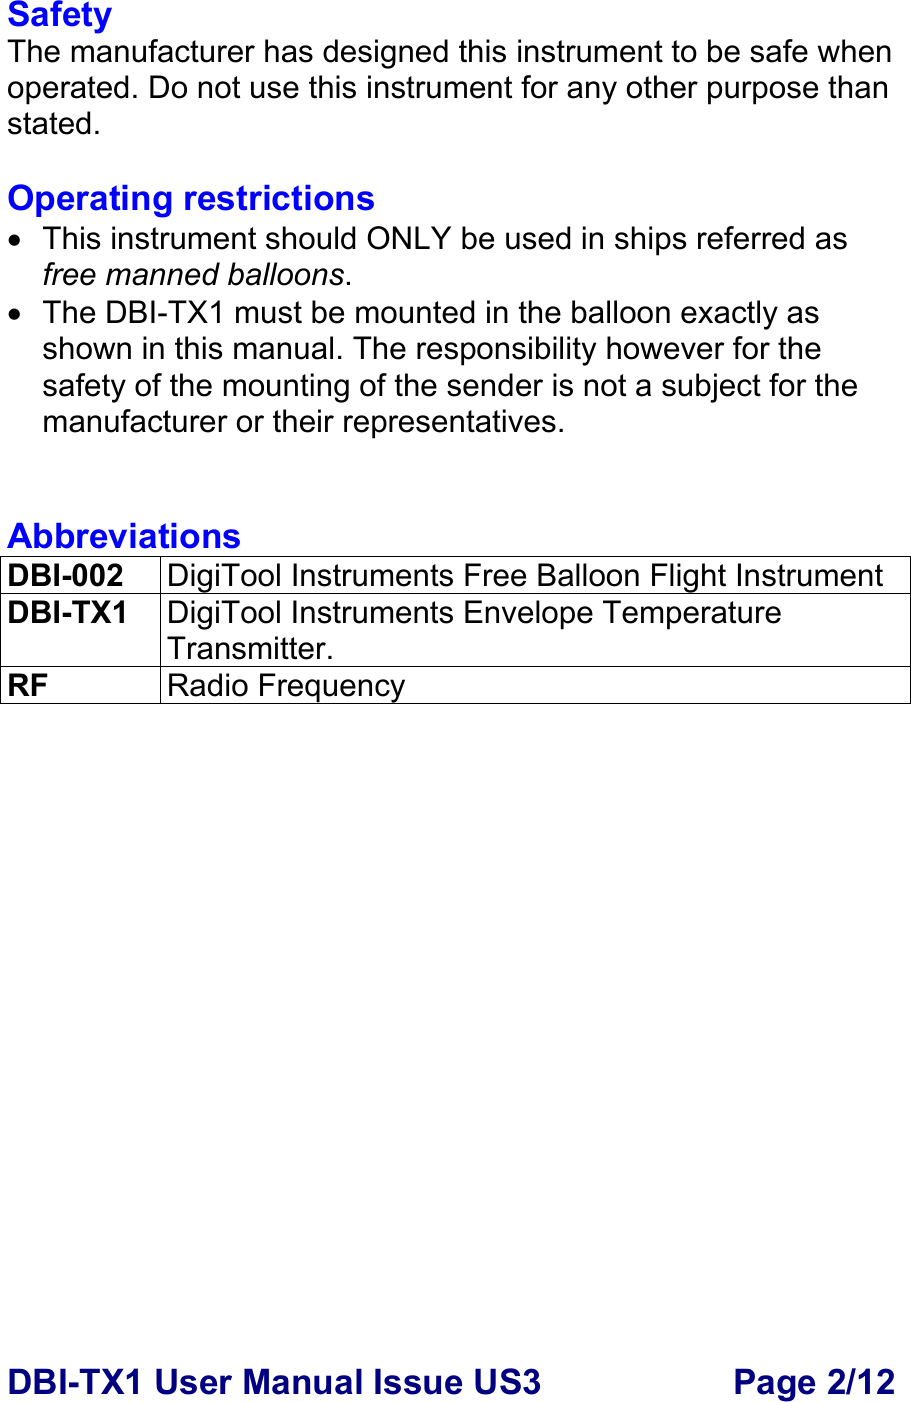 DBI-TX1 User Manual Issue US3  Page 2/12 Safety The manufacturer has designed this instrument to be safe when operated. Do not use this instrument for any other purpose than stated.  Operating restrictions •  This instrument should ONLY be used in ships referred as free manned balloons. •  The DBI-TX1 must be mounted in the balloon exactly as shown in this manual. The responsibility however for the safety of the mounting of the sender is not a subject for the manufacturer or their representatives.   Abbreviations DBI-002  DigiTool Instruments Free Balloon Flight Instrument DBI-TX1  DigiTool Instruments Envelope Temperature Transmitter. RF  Radio Frequency  